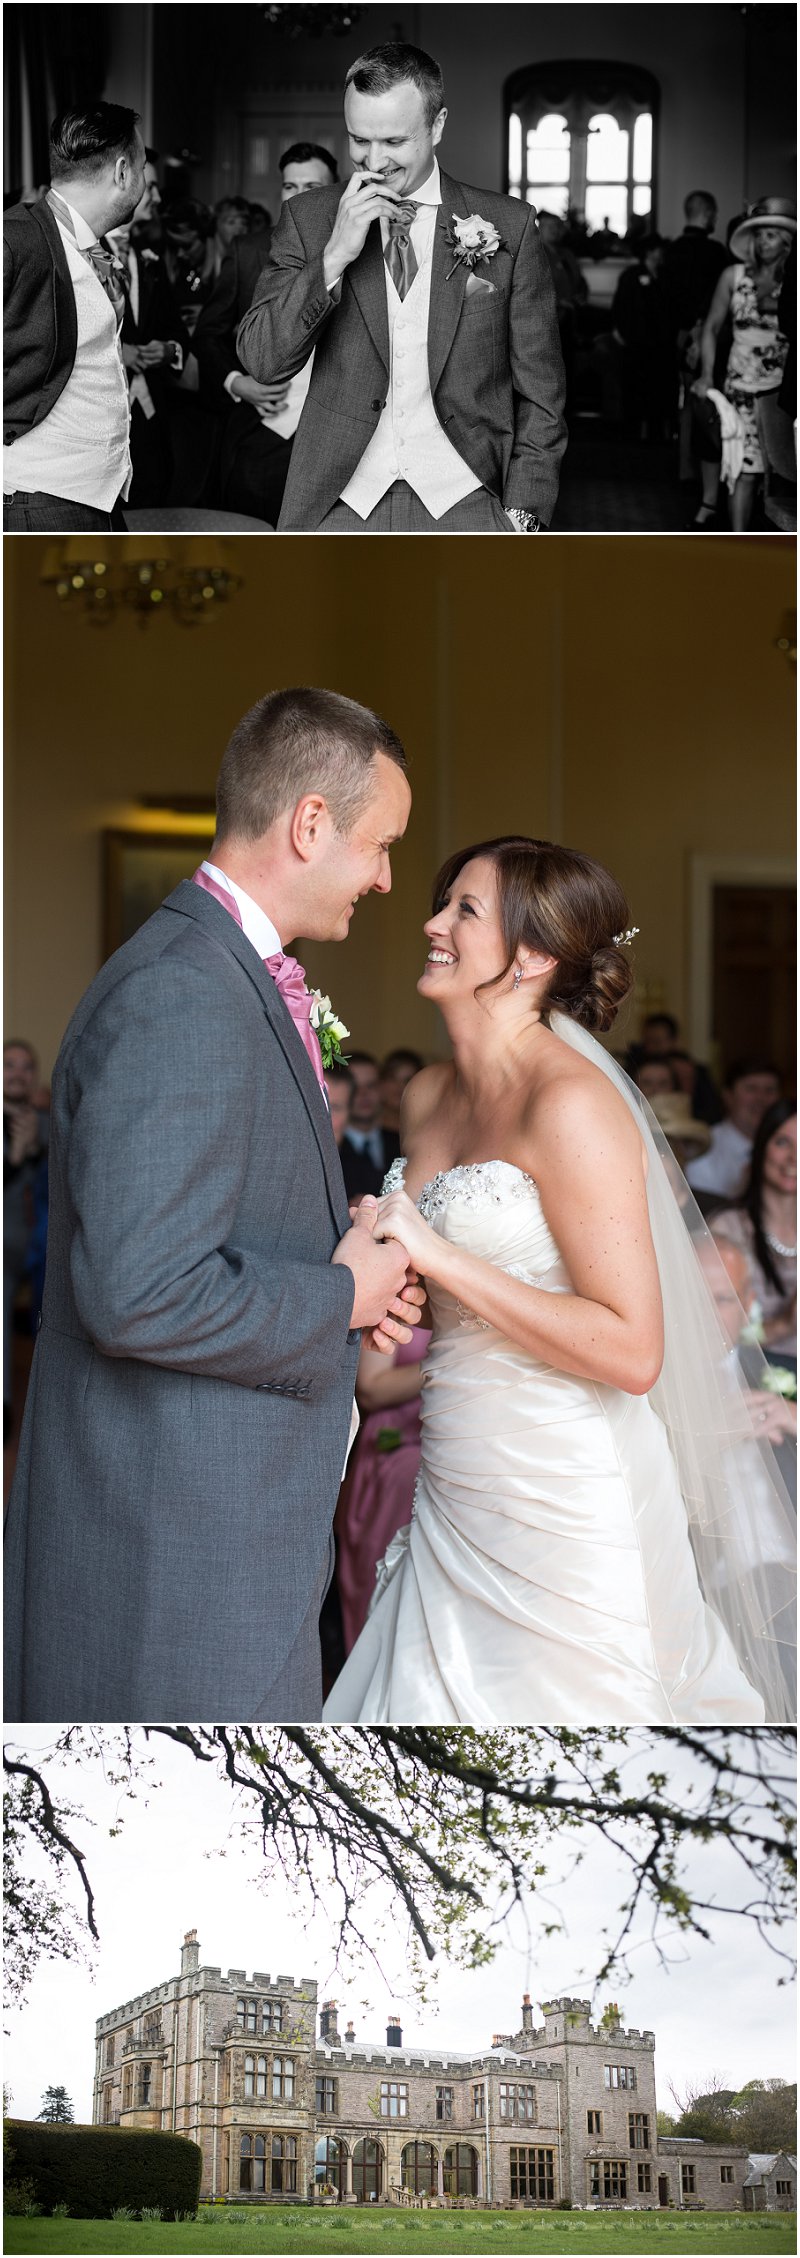 Bride and Groom wedding ceremony at Armathwaite Hall in Cumbria Photography